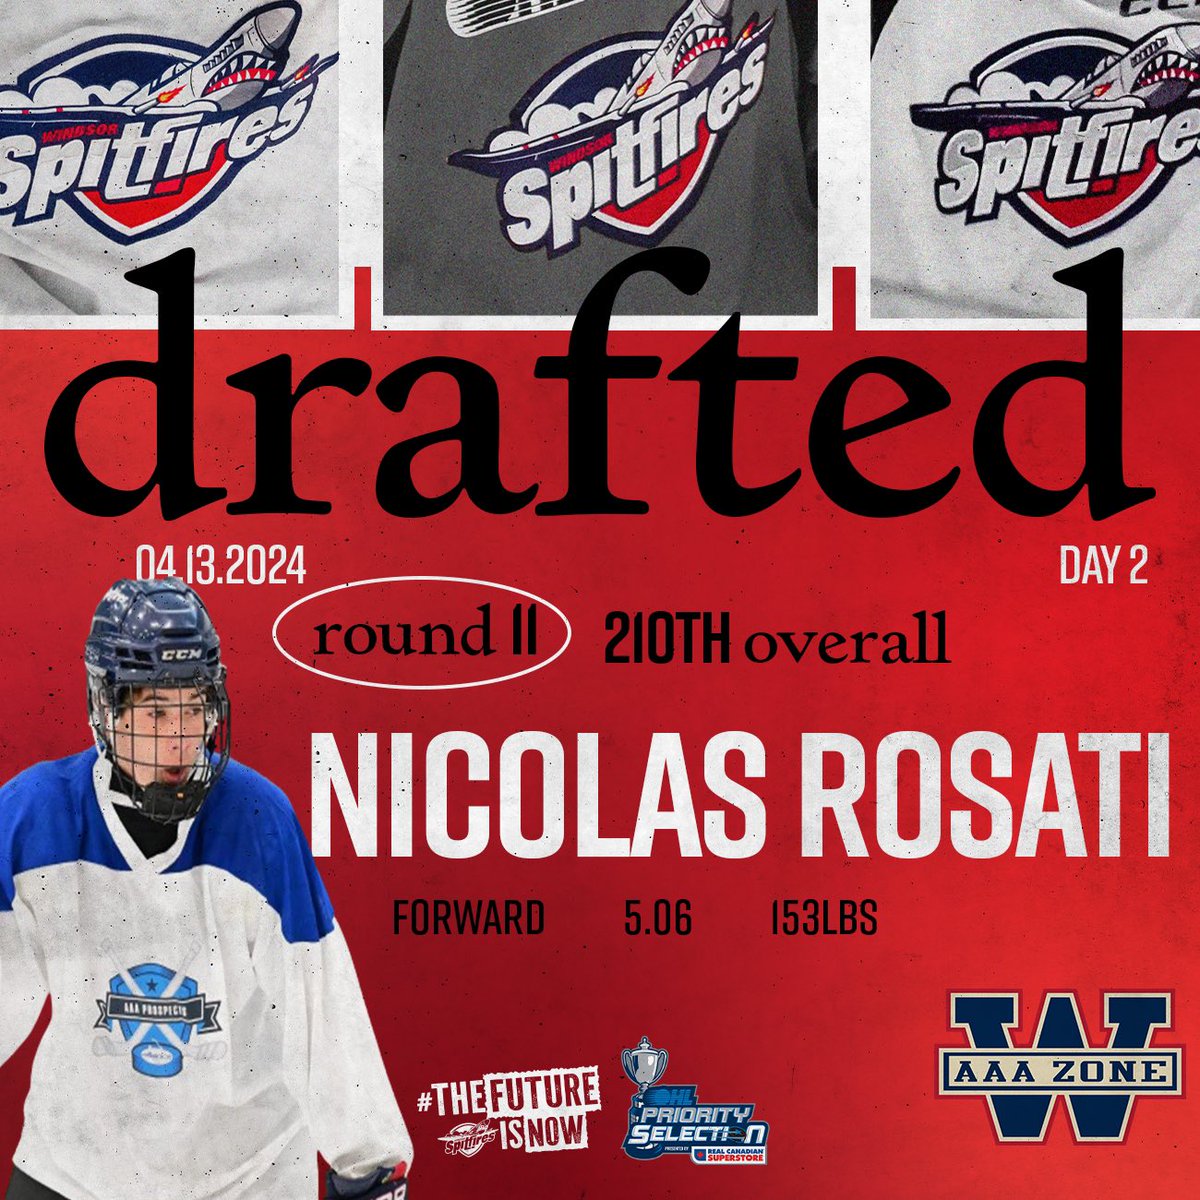 Hometown kid! 🍕 With the 210th overall pick in the 2024 OHL Priority Selection, the Windsor Spitfires are proud to select Nicolas Rosati from the Windsor AAA Zone team! #WindsorSpitfires #OHLDraft